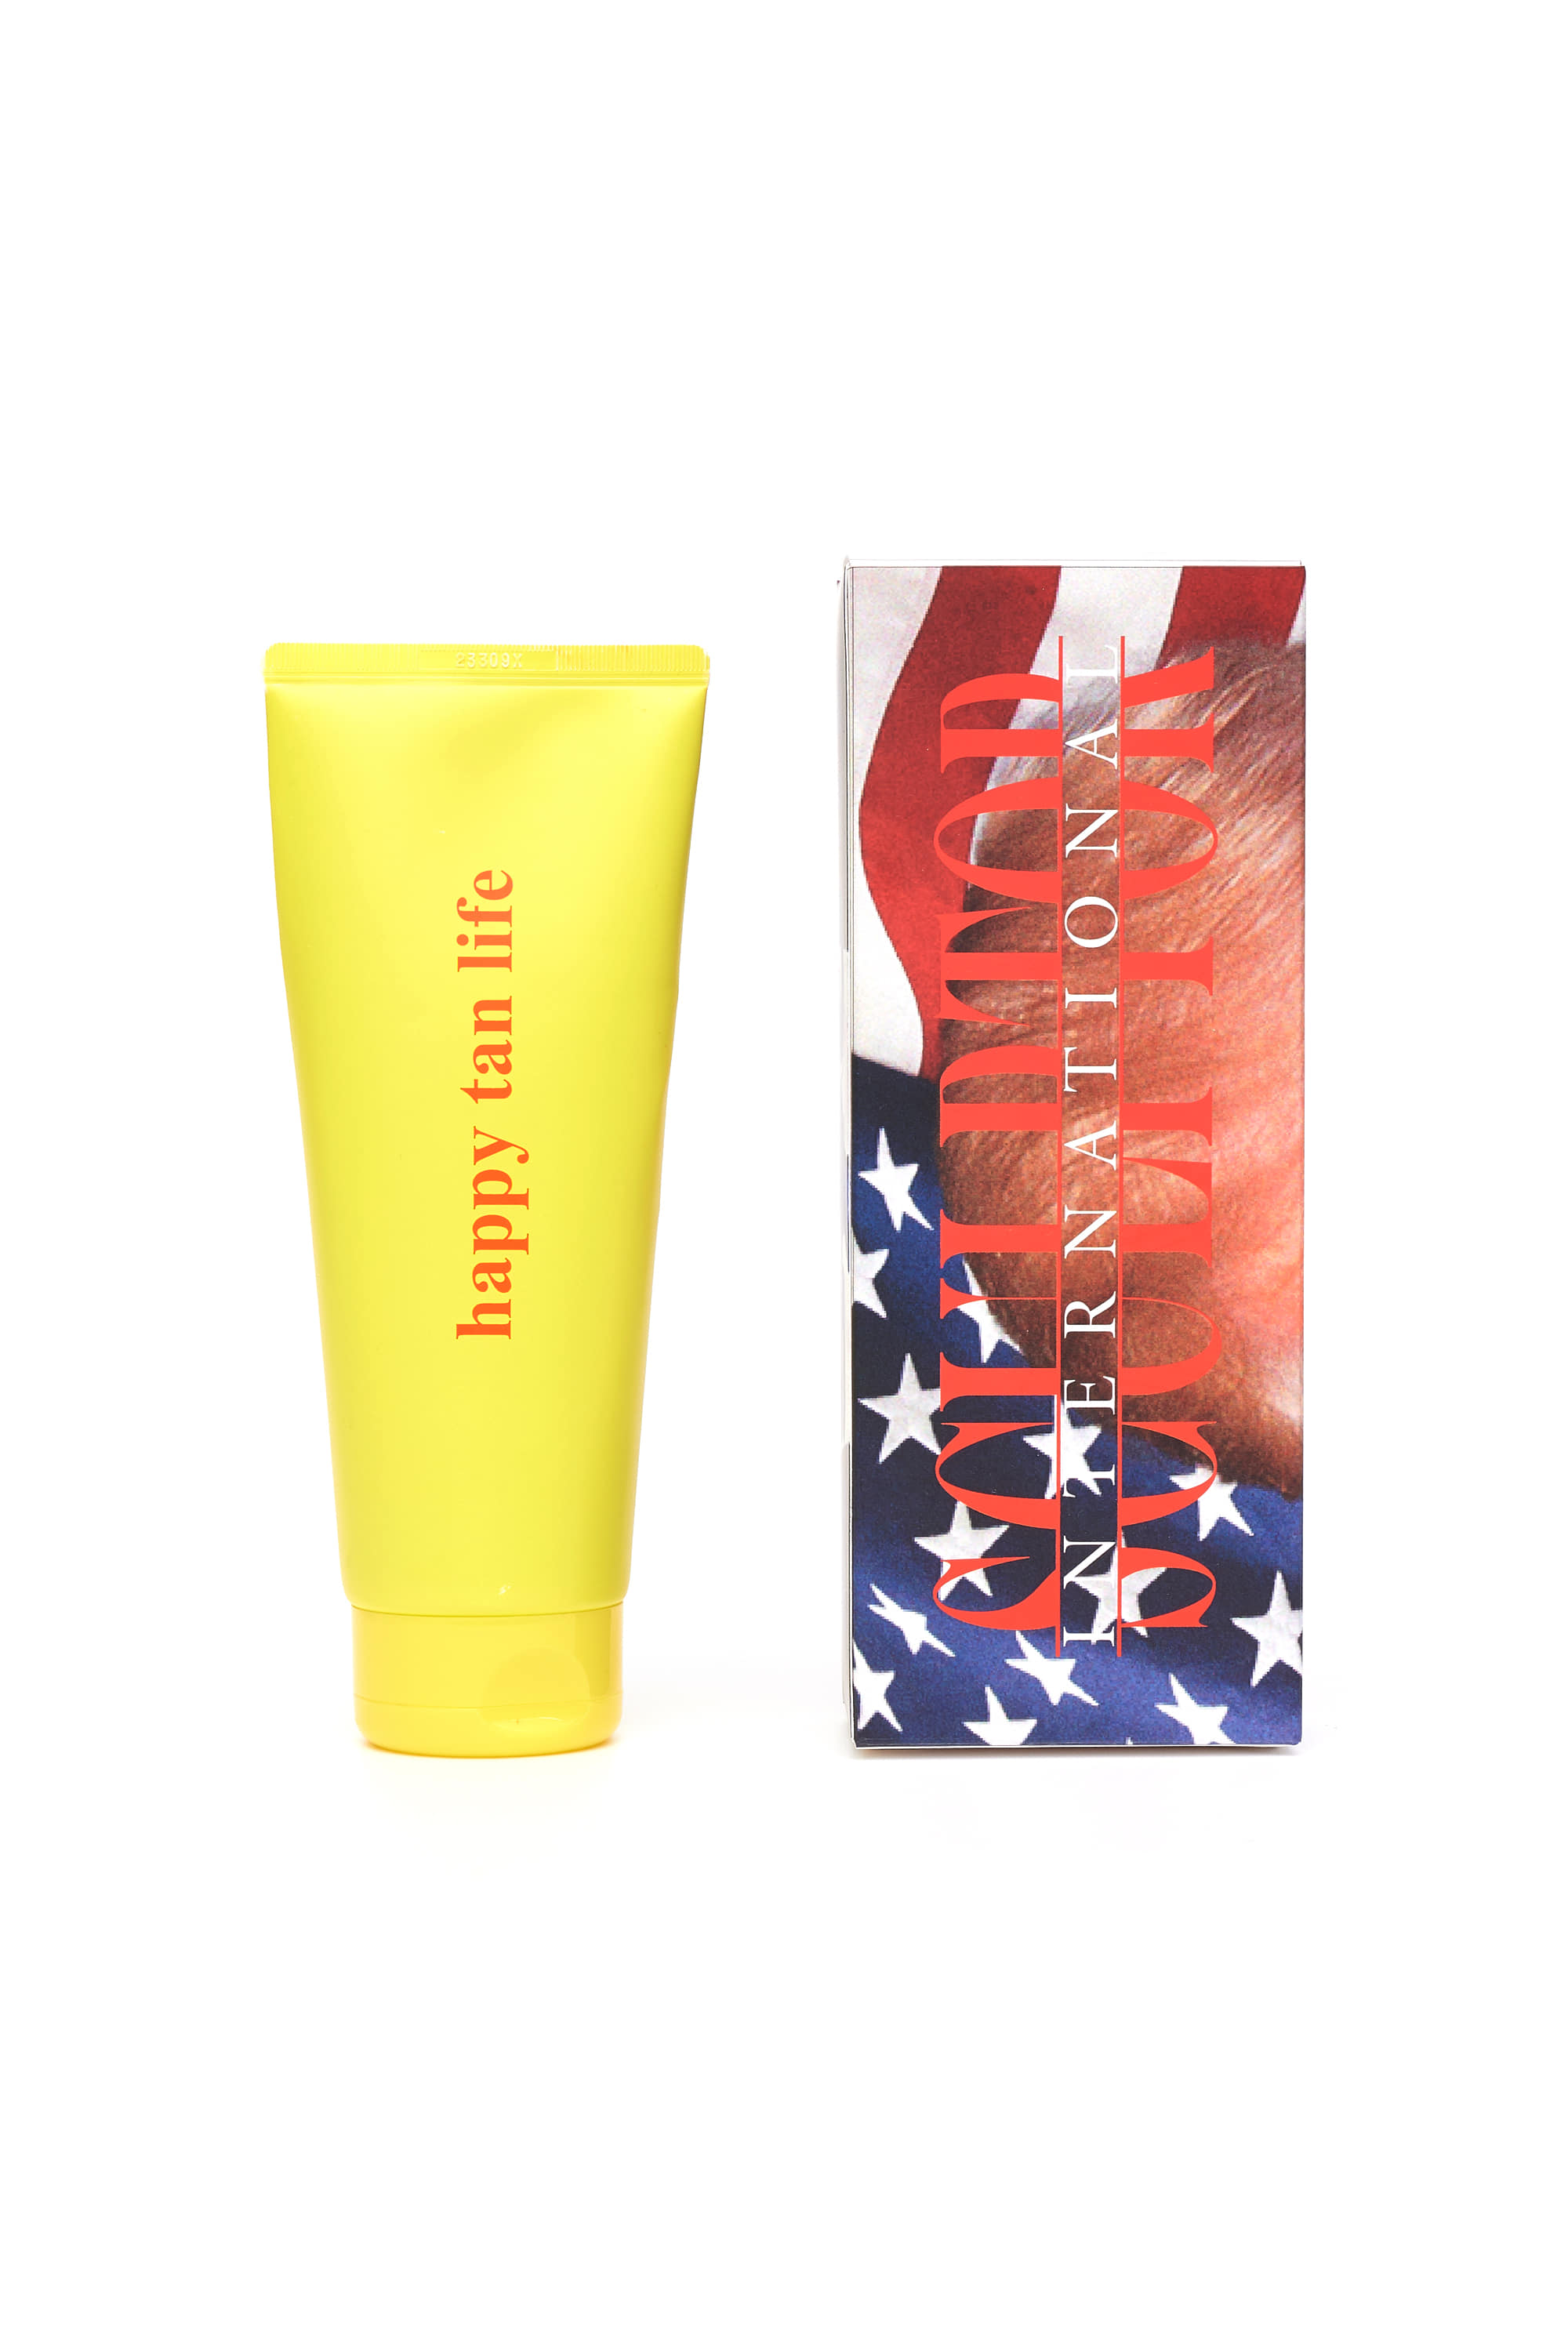 [ Sculptor X ESVC ] Great Again Tanning Lotion Yellow